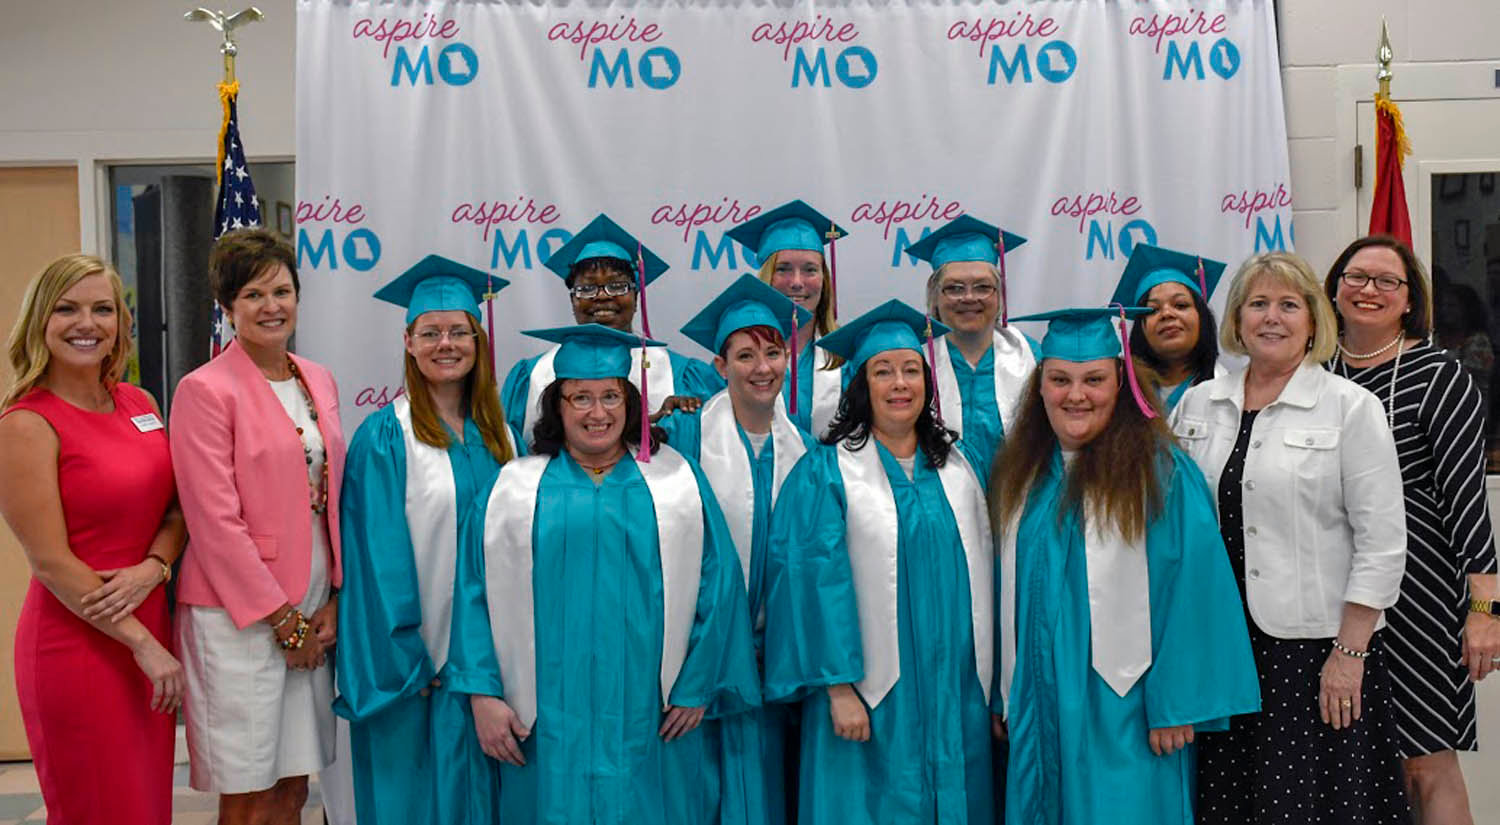 Nine women make up the first graduating cohort of Aspire MO, an entrepreneurship program held at the Women’s Eastern Reception, Diagnostic and Correctional Center in Vandalia.